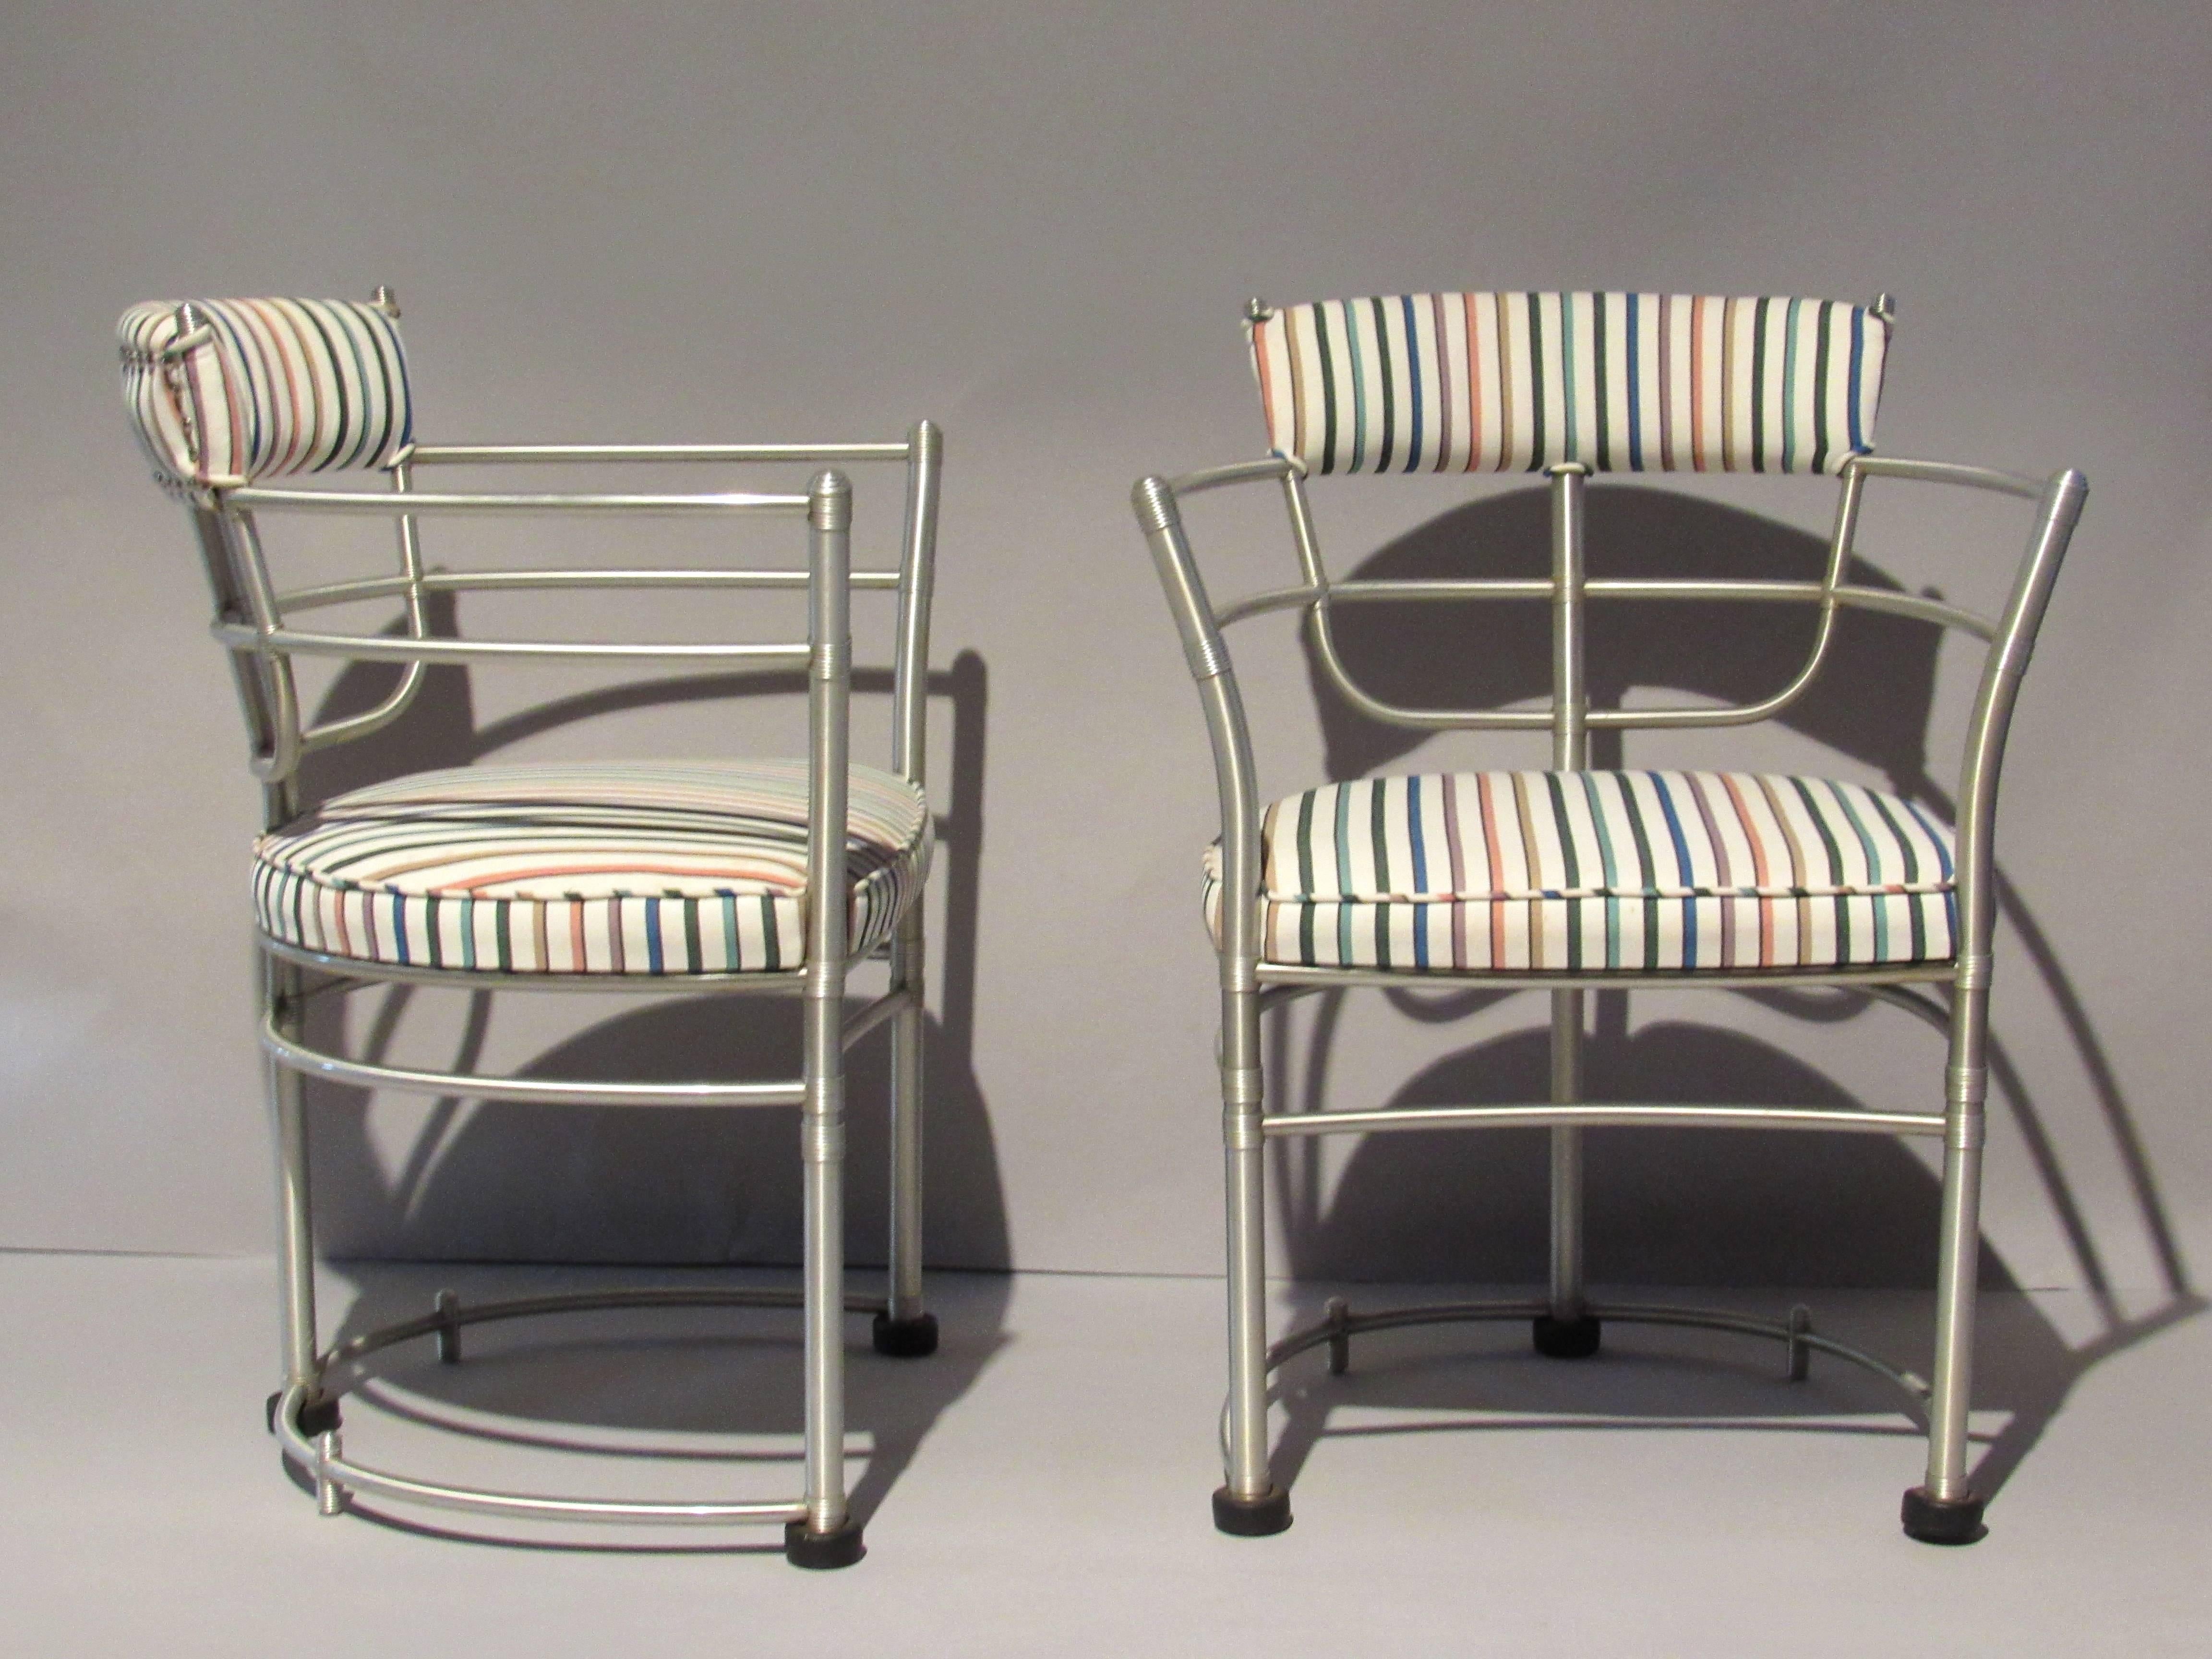 Two early aluminum armchairs manufactured in Rome, New York by the Warren McArthur Corporation during the first two years of production from that factory.
The chairs were re-upholstered probably during the early 1960s in this colorfully striped